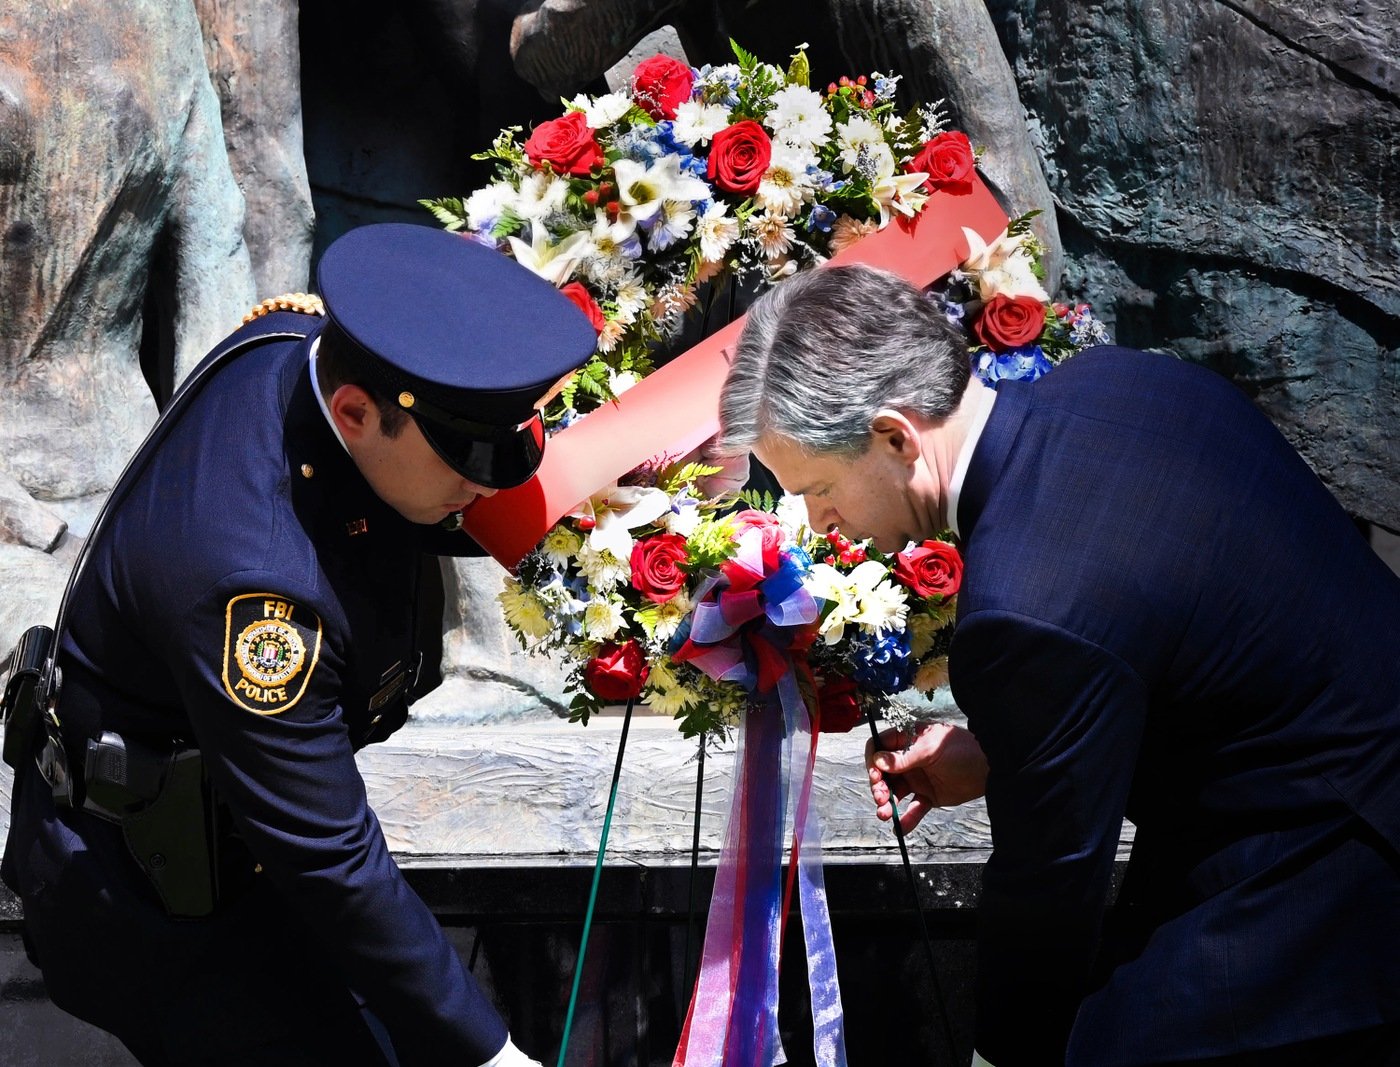 Director Wray and the FBI Police lay a wreath at FBI Headquarters commemorating National Police Week and law enforcement officers who have made the ultimate sacrifice.